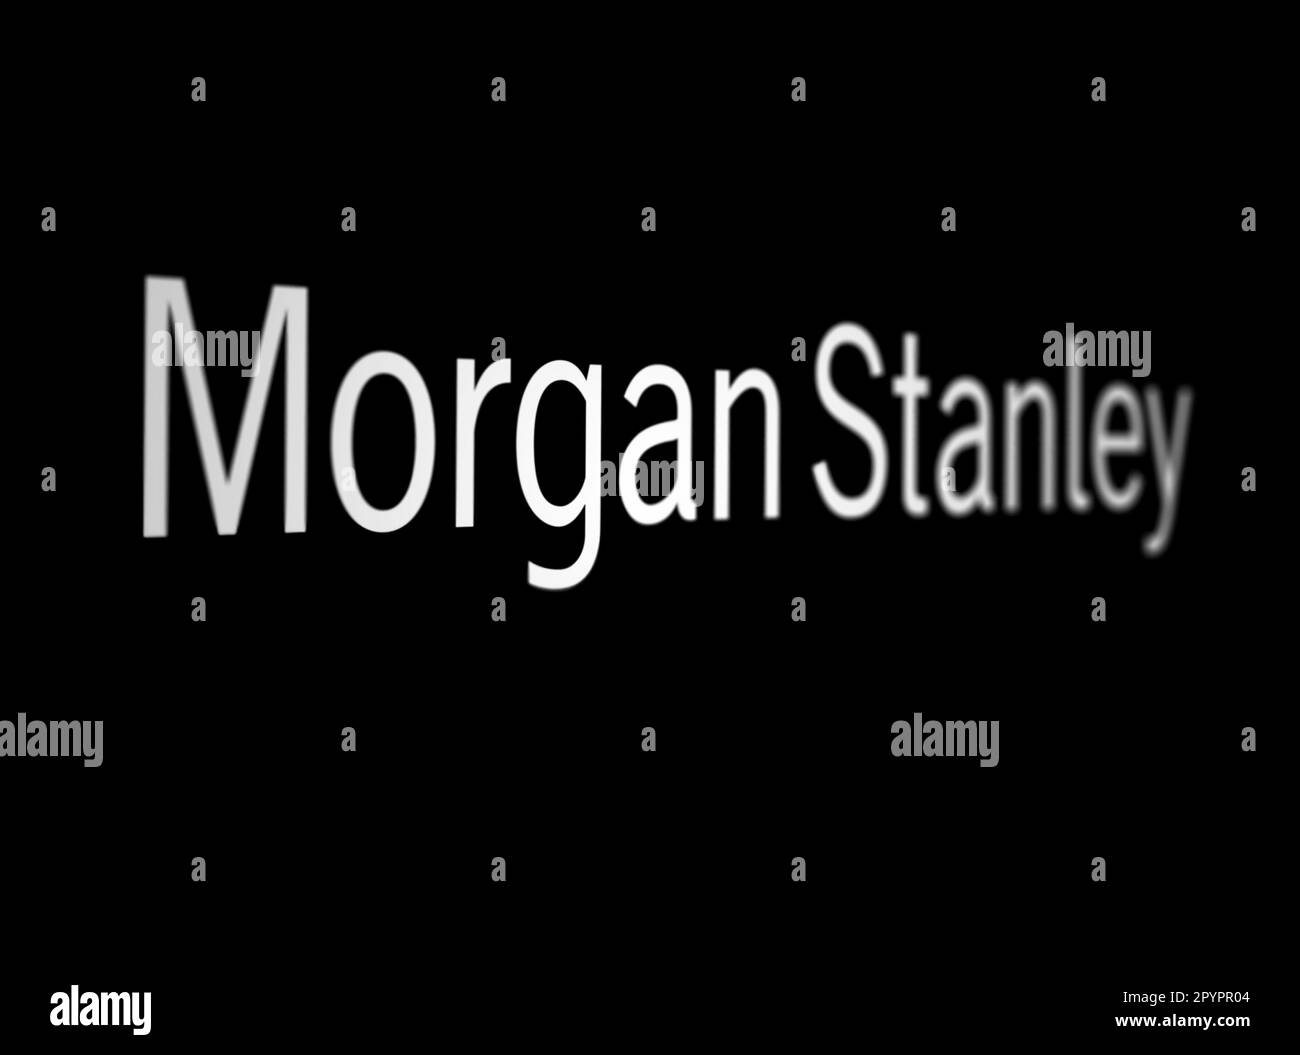 New York City, US, March 2023: White Morgan Stanley logo on a black background. Morgan Stanley is an American multinational investment bank. Illustrat Stock Photo